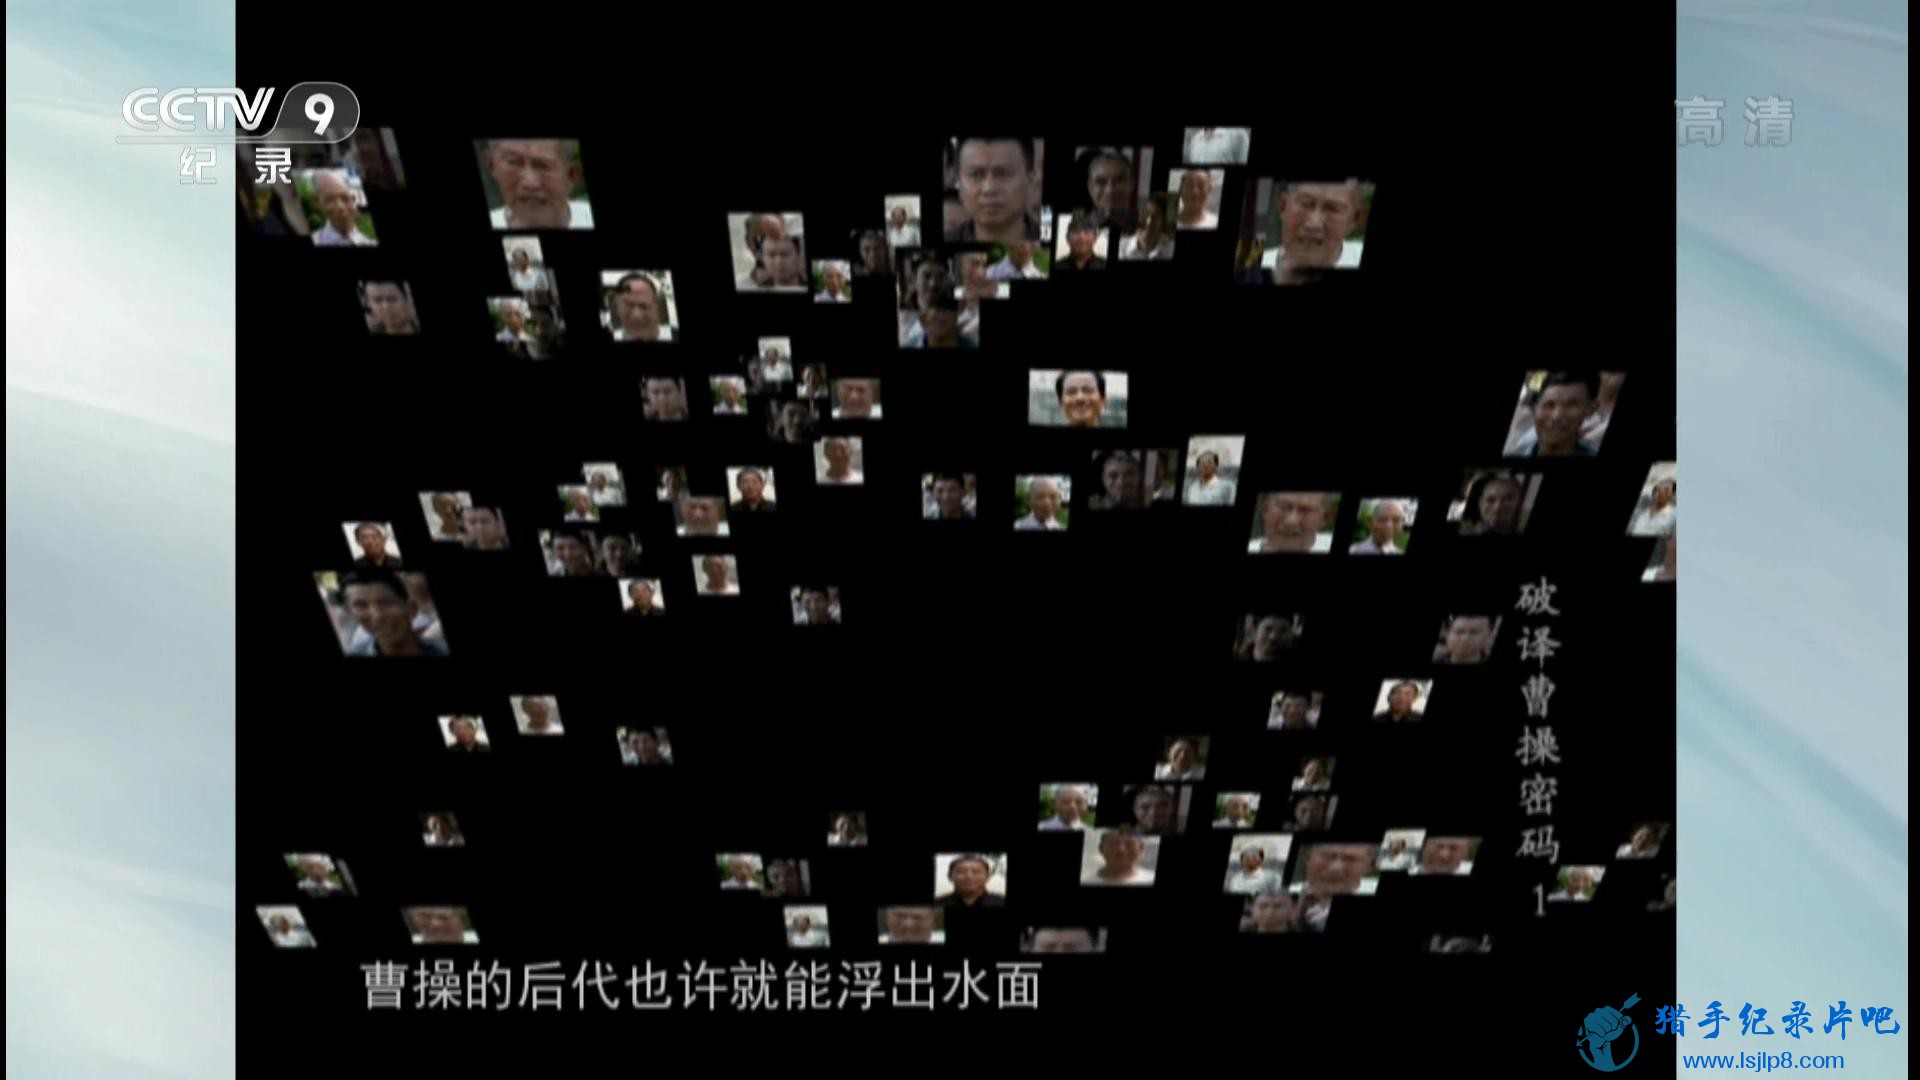 20150209_CCTV-9_Discovery-Cracking.the.Genetic.Code.of.Cao.Cao.EP01-jlp_20180215155233.JPG